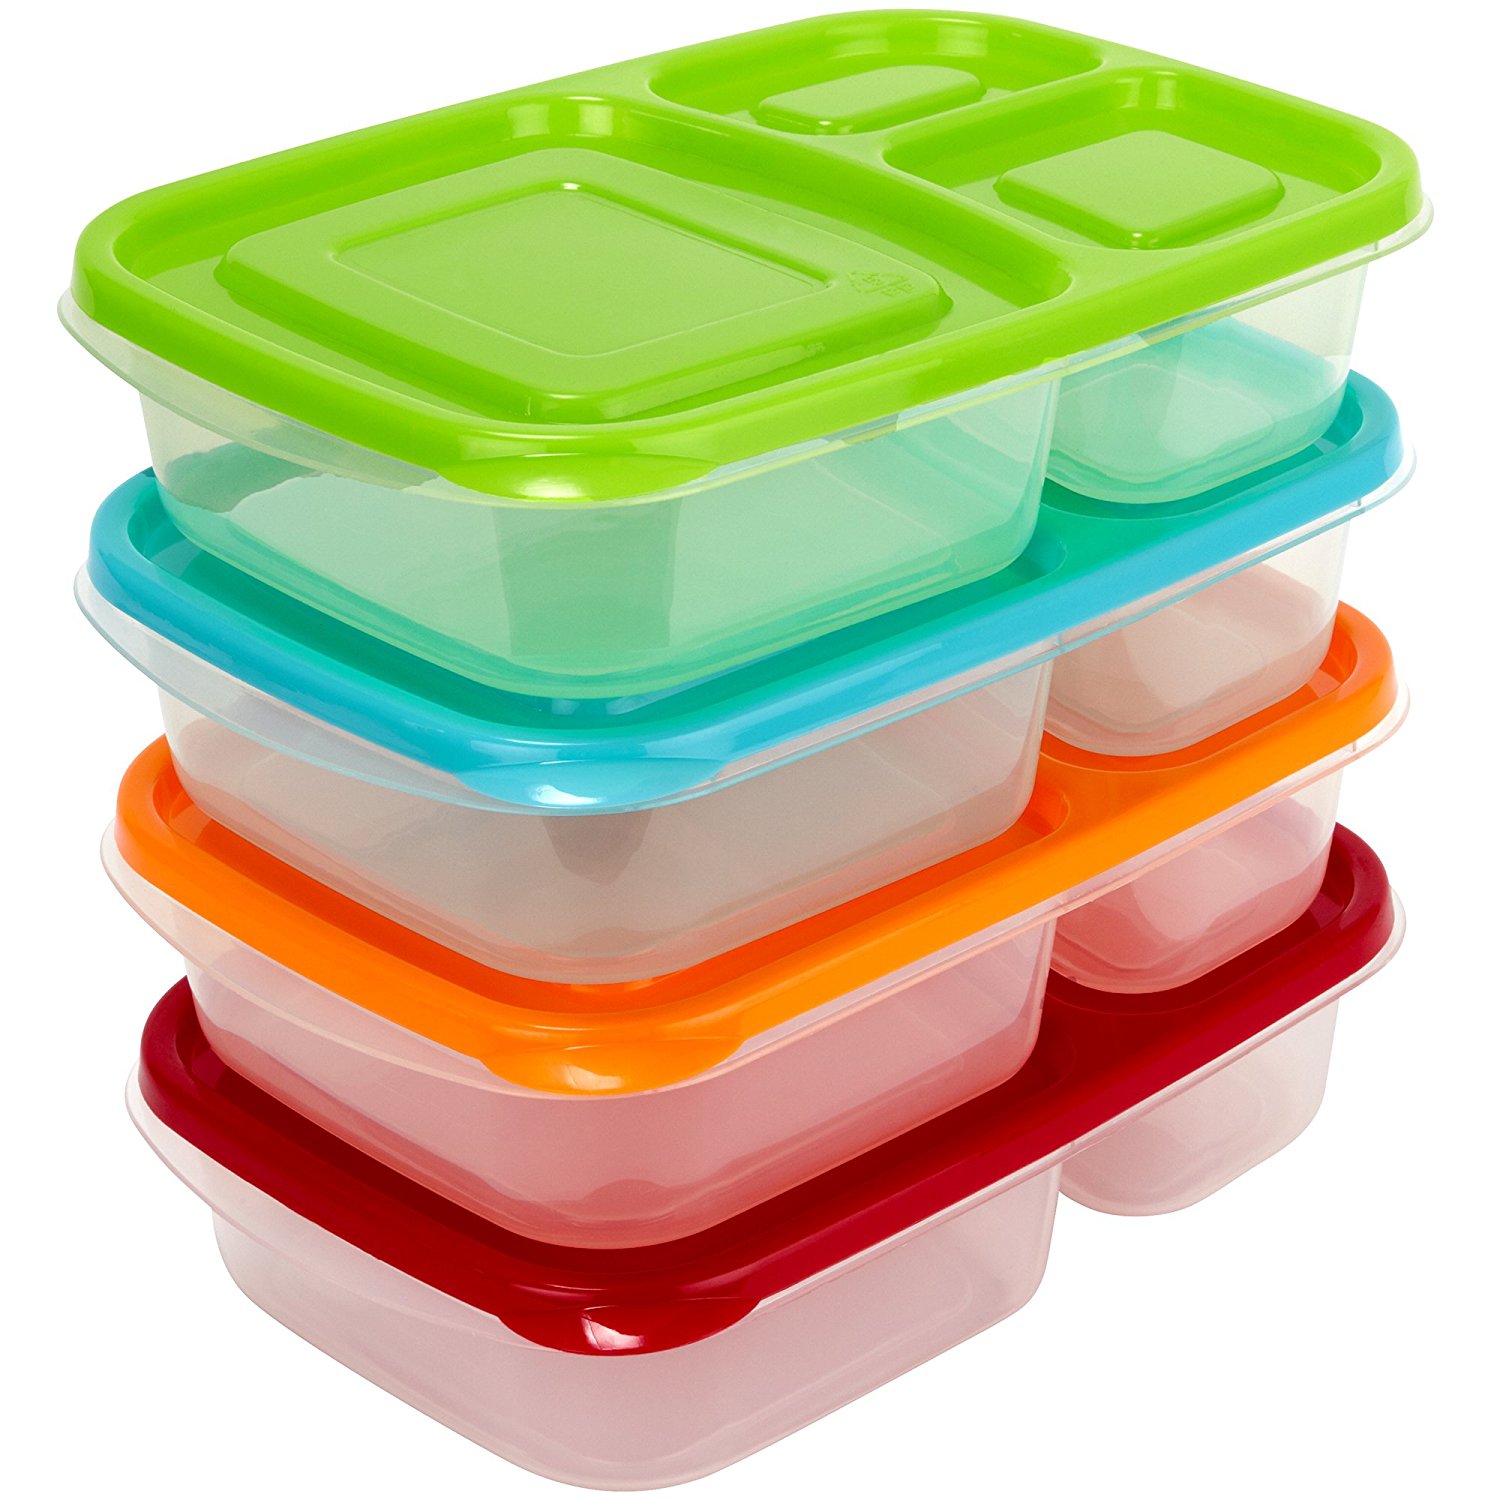 Reusable Bento Lunch Box & Divided Food Storage With Multi Colored Lids